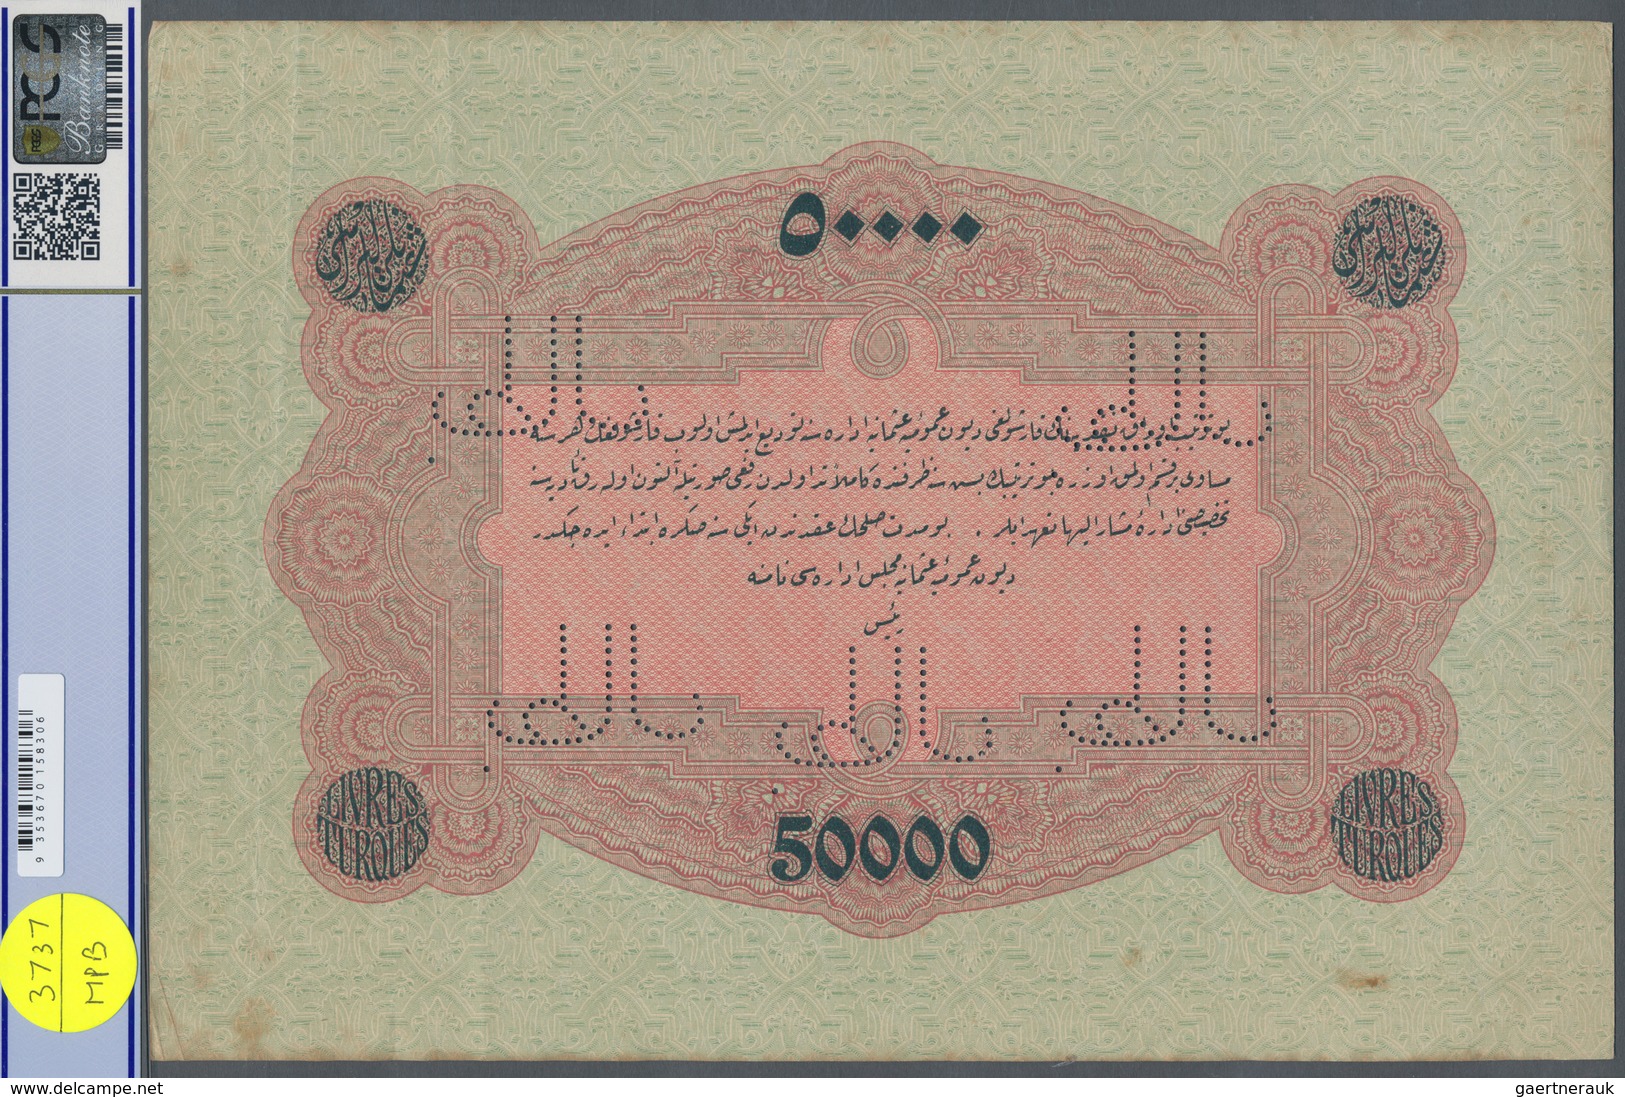 Turkey / Türkei: Highly Rare Specimen Banknote Of 50.000 Livres ND(1916-17) AH1332, RS-4-11, With Ar - Turquia